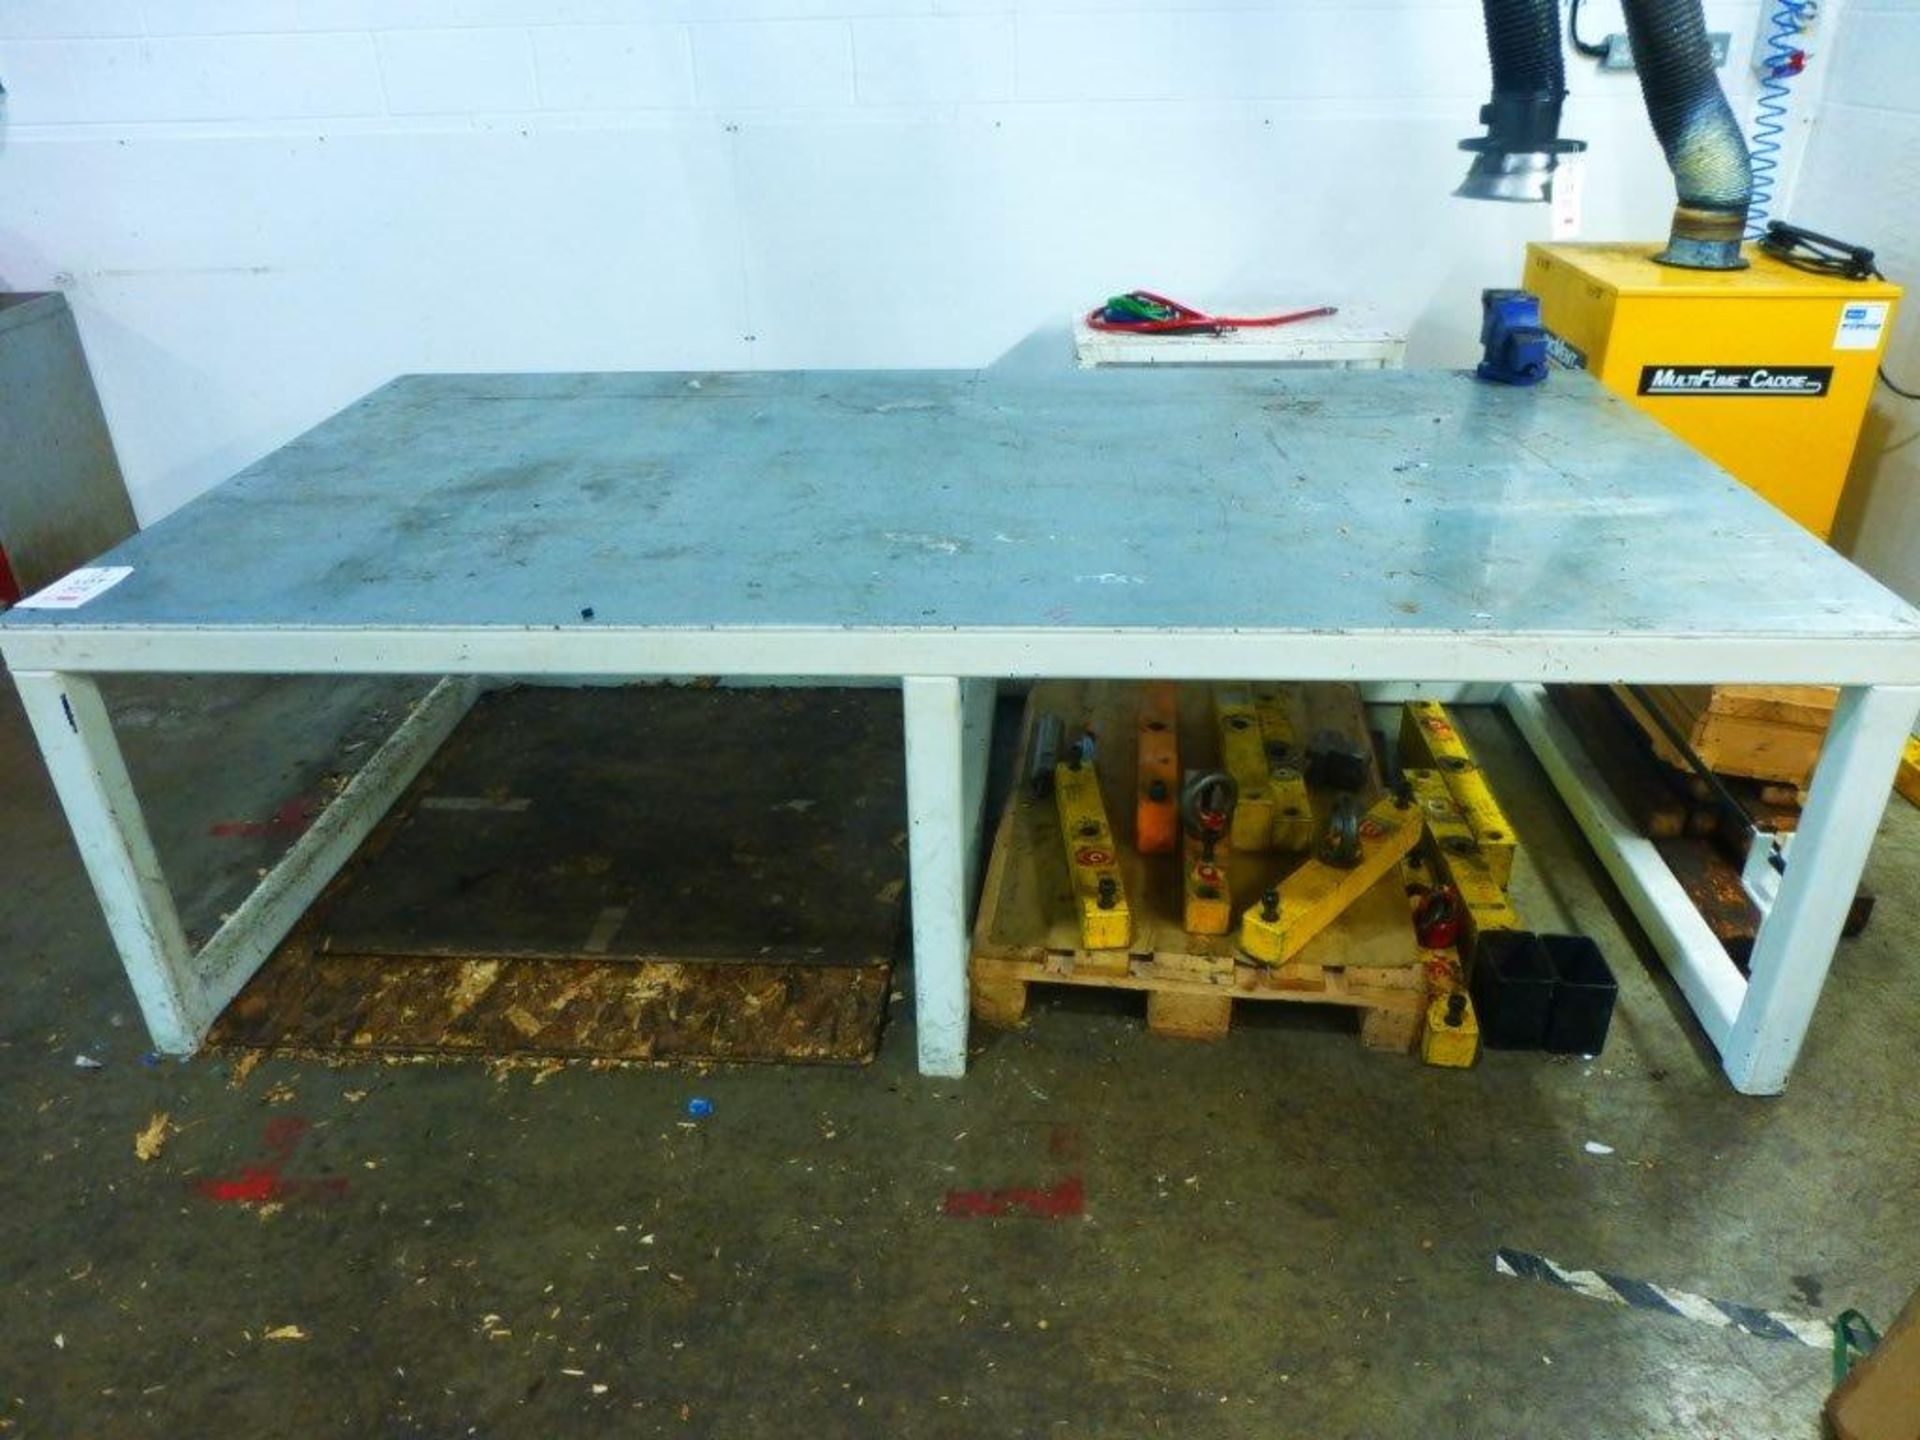 2840mm x 1500mm x 860mm heavy duty steel topped work table (contents not included)